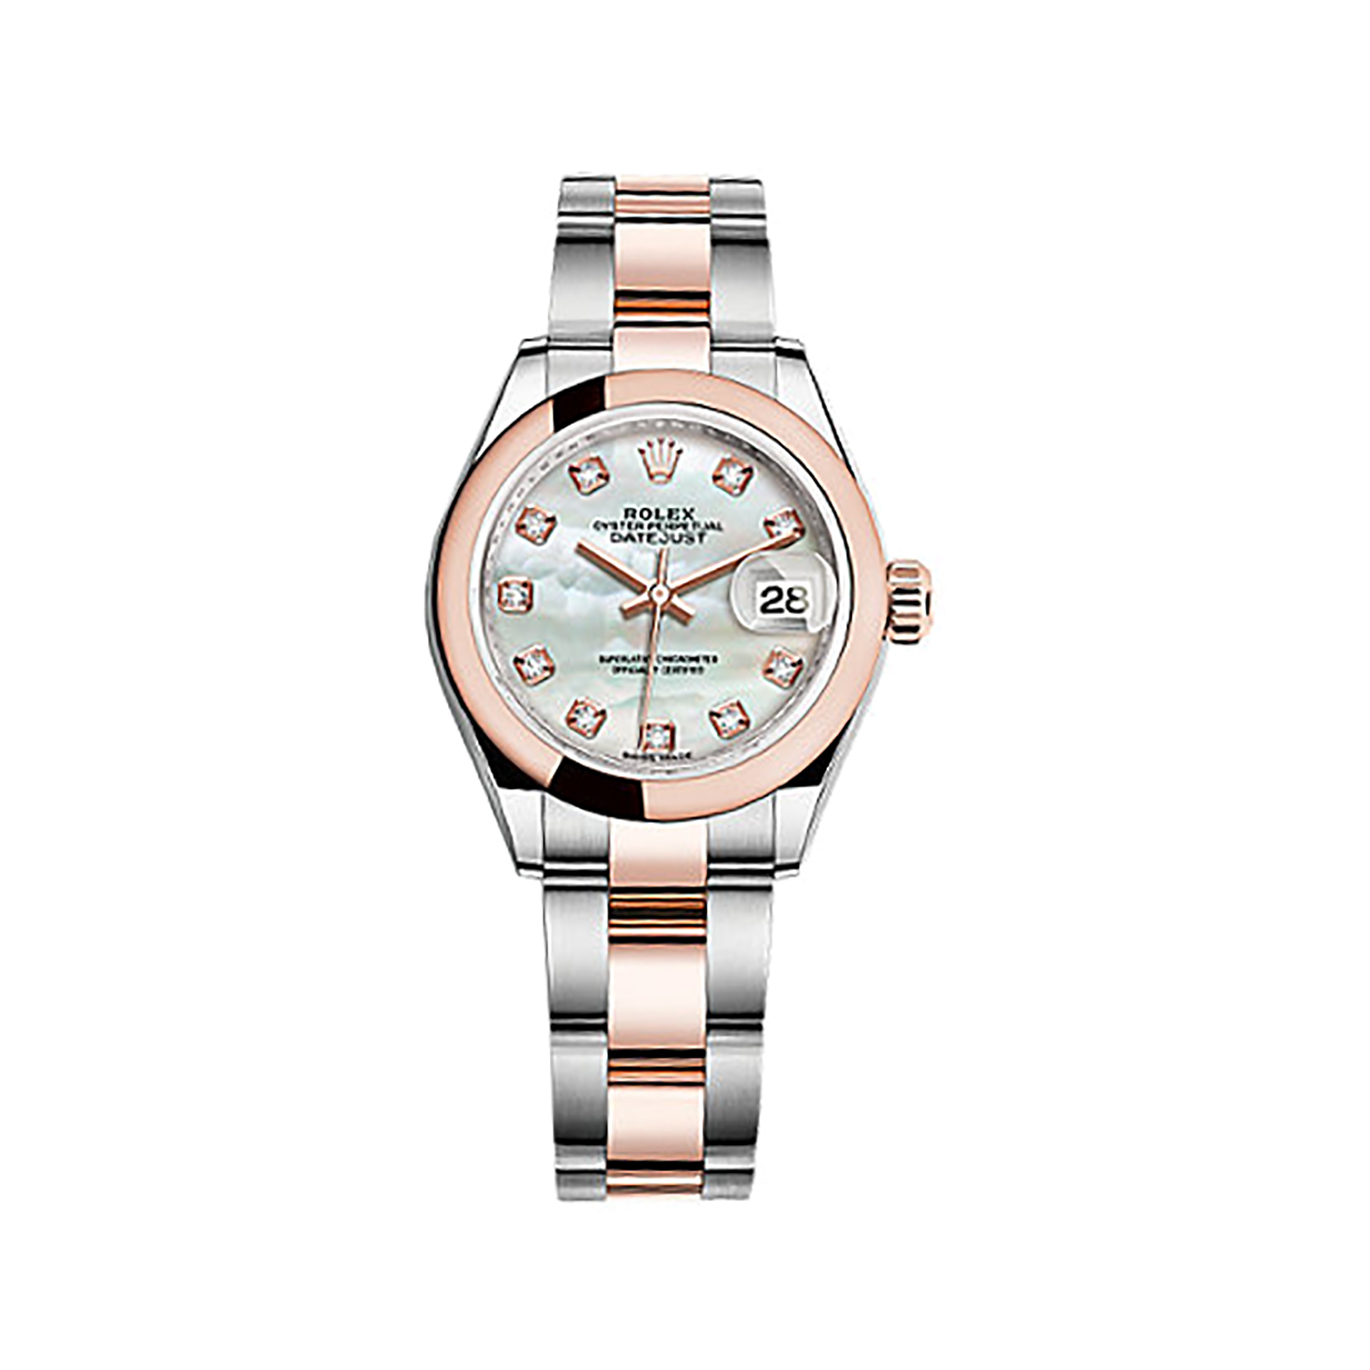 Lady-Datejust 28 279161 Rose Gold & Stainless Steel Watch (White Mother-of-pearl Set with Diamonds)